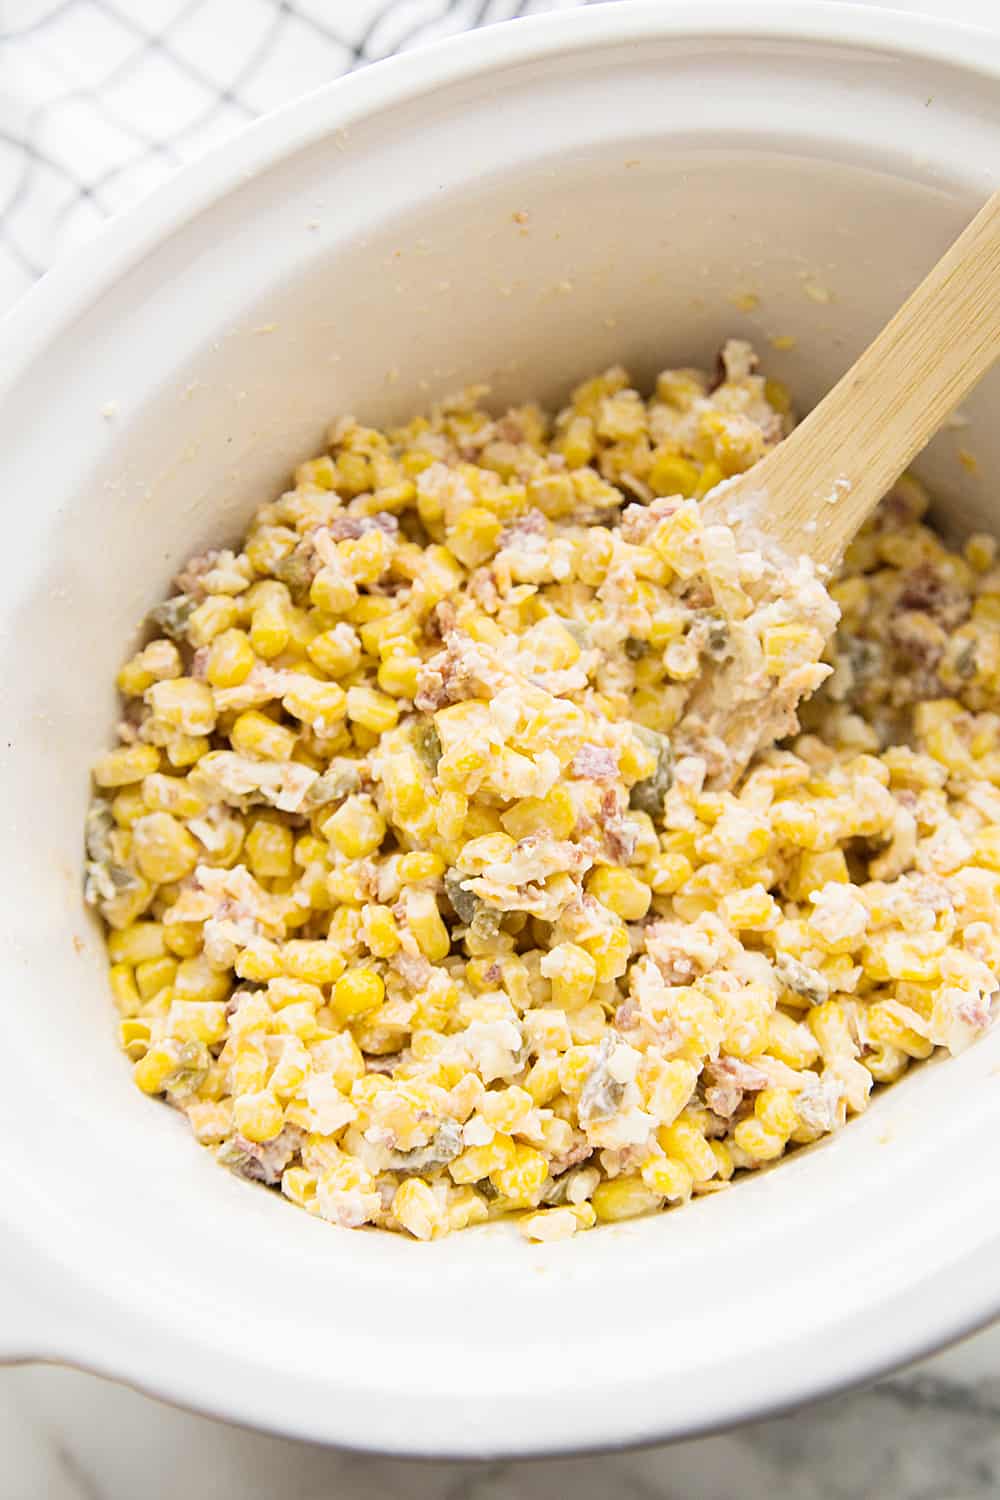 Slow Cooker Cheesy Hot Corn Dip - Looking for a game day appetizer that will have family, friends, and fans cheering? Serve a slow cooker full of this cheesy hot corn dip! #appetizer #slowcooker #crockpot #recipe #corndip #hotcorndip #halfscratched #slowcookerrecipe #crockpotrecipe #appetizerrecipe